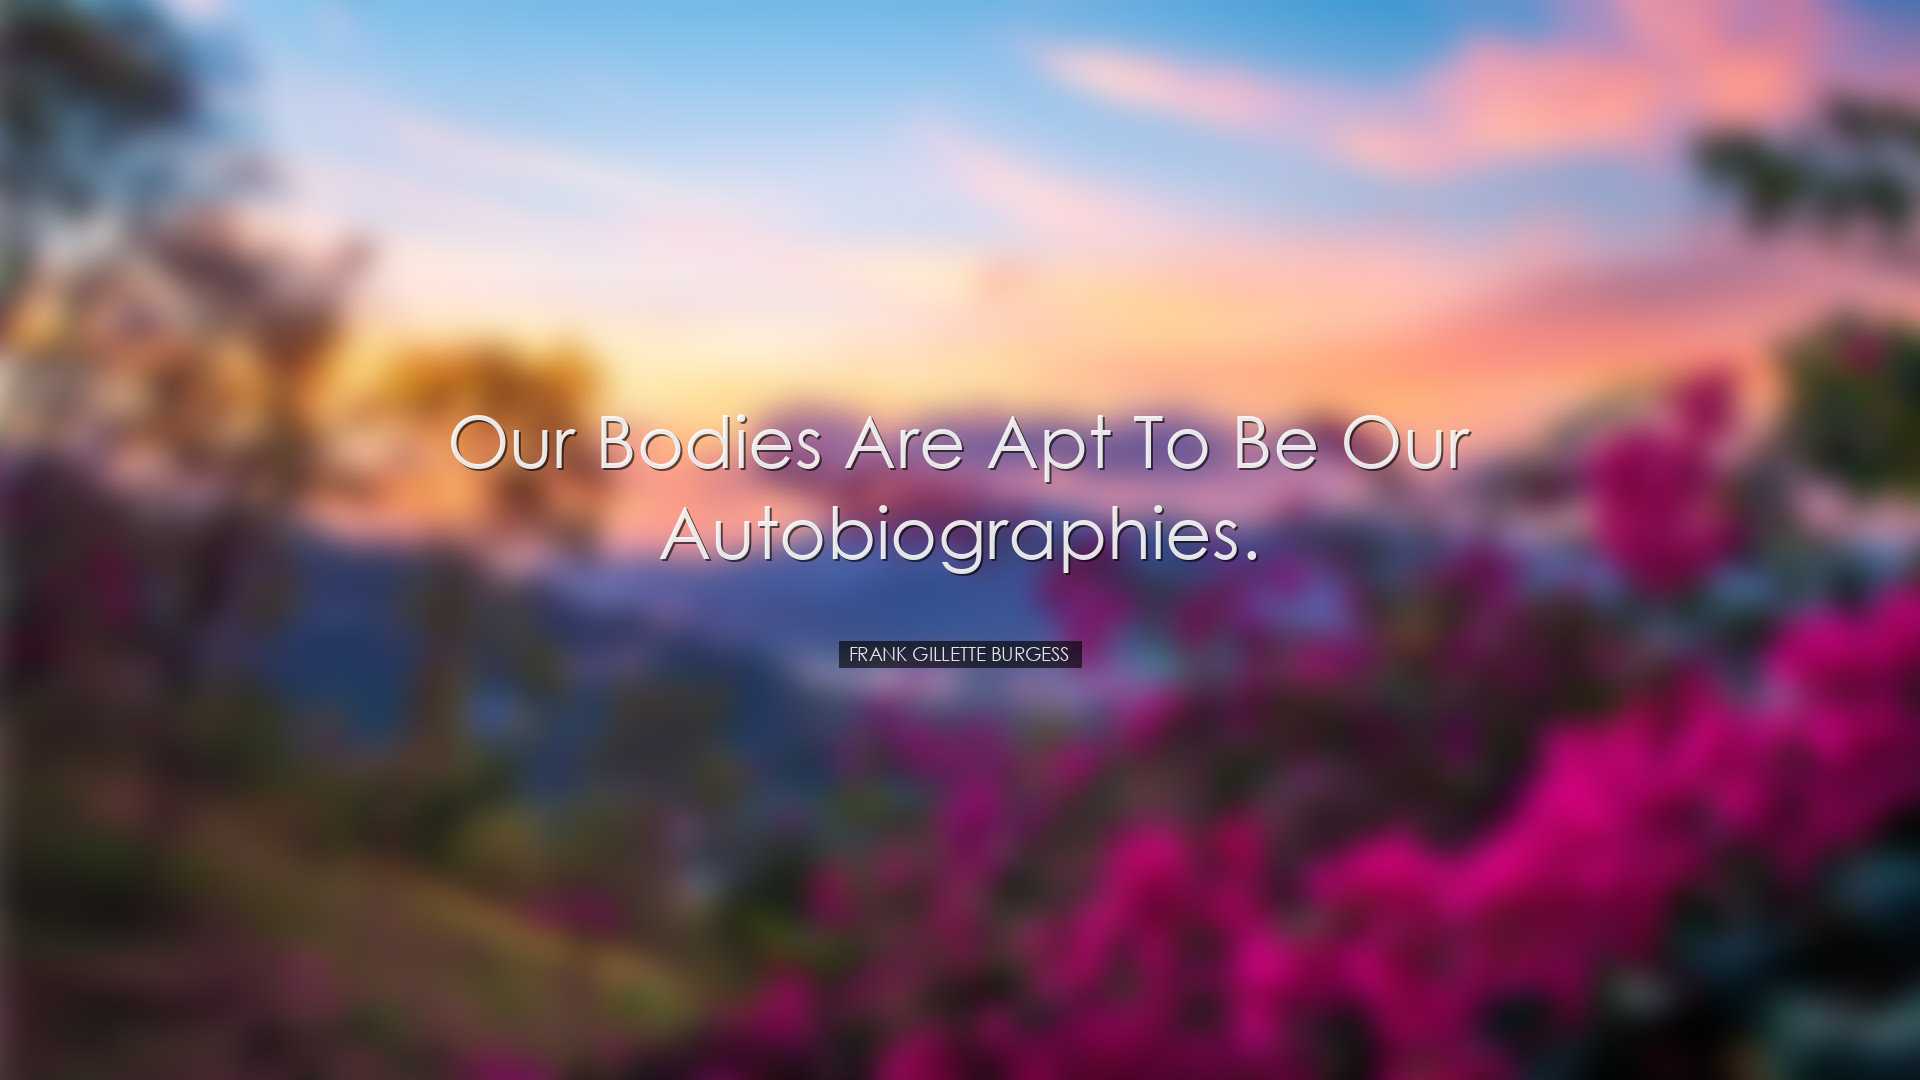 Our bodies are apt to be our autobiographies. - Frank Gillette Bur